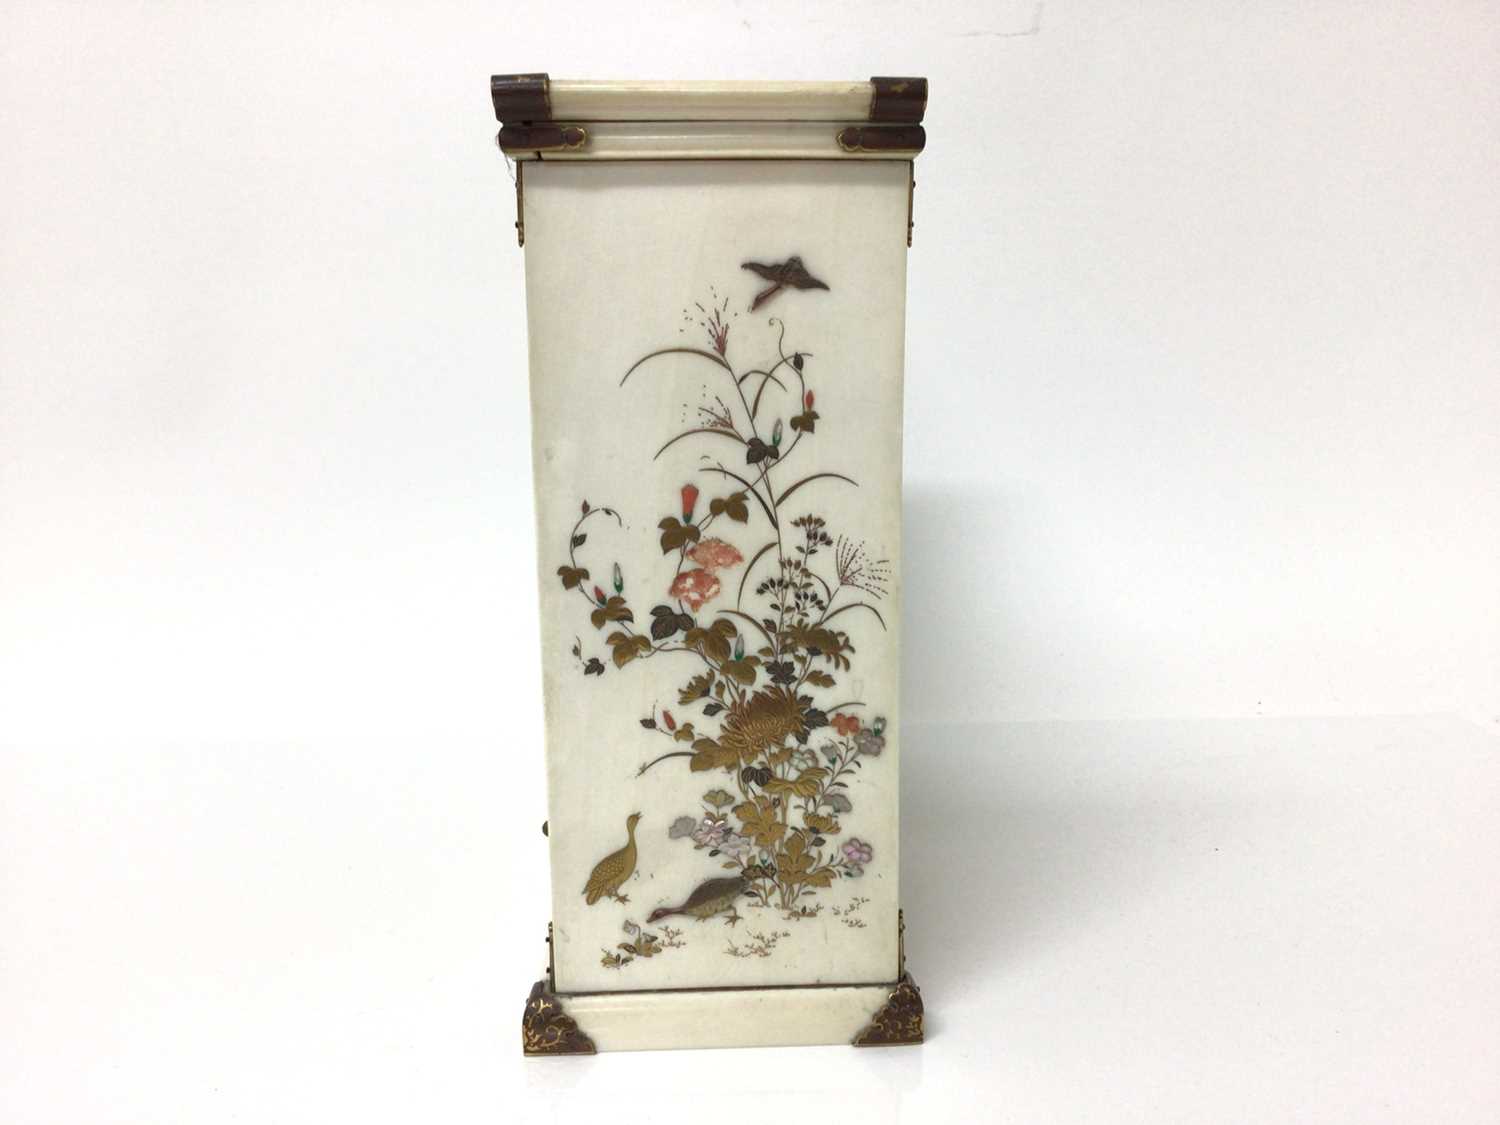 19th century Japanese ivory shibayama cabinet, finely decorated with birds and flowers, 20cm high (s - Image 2 of 10